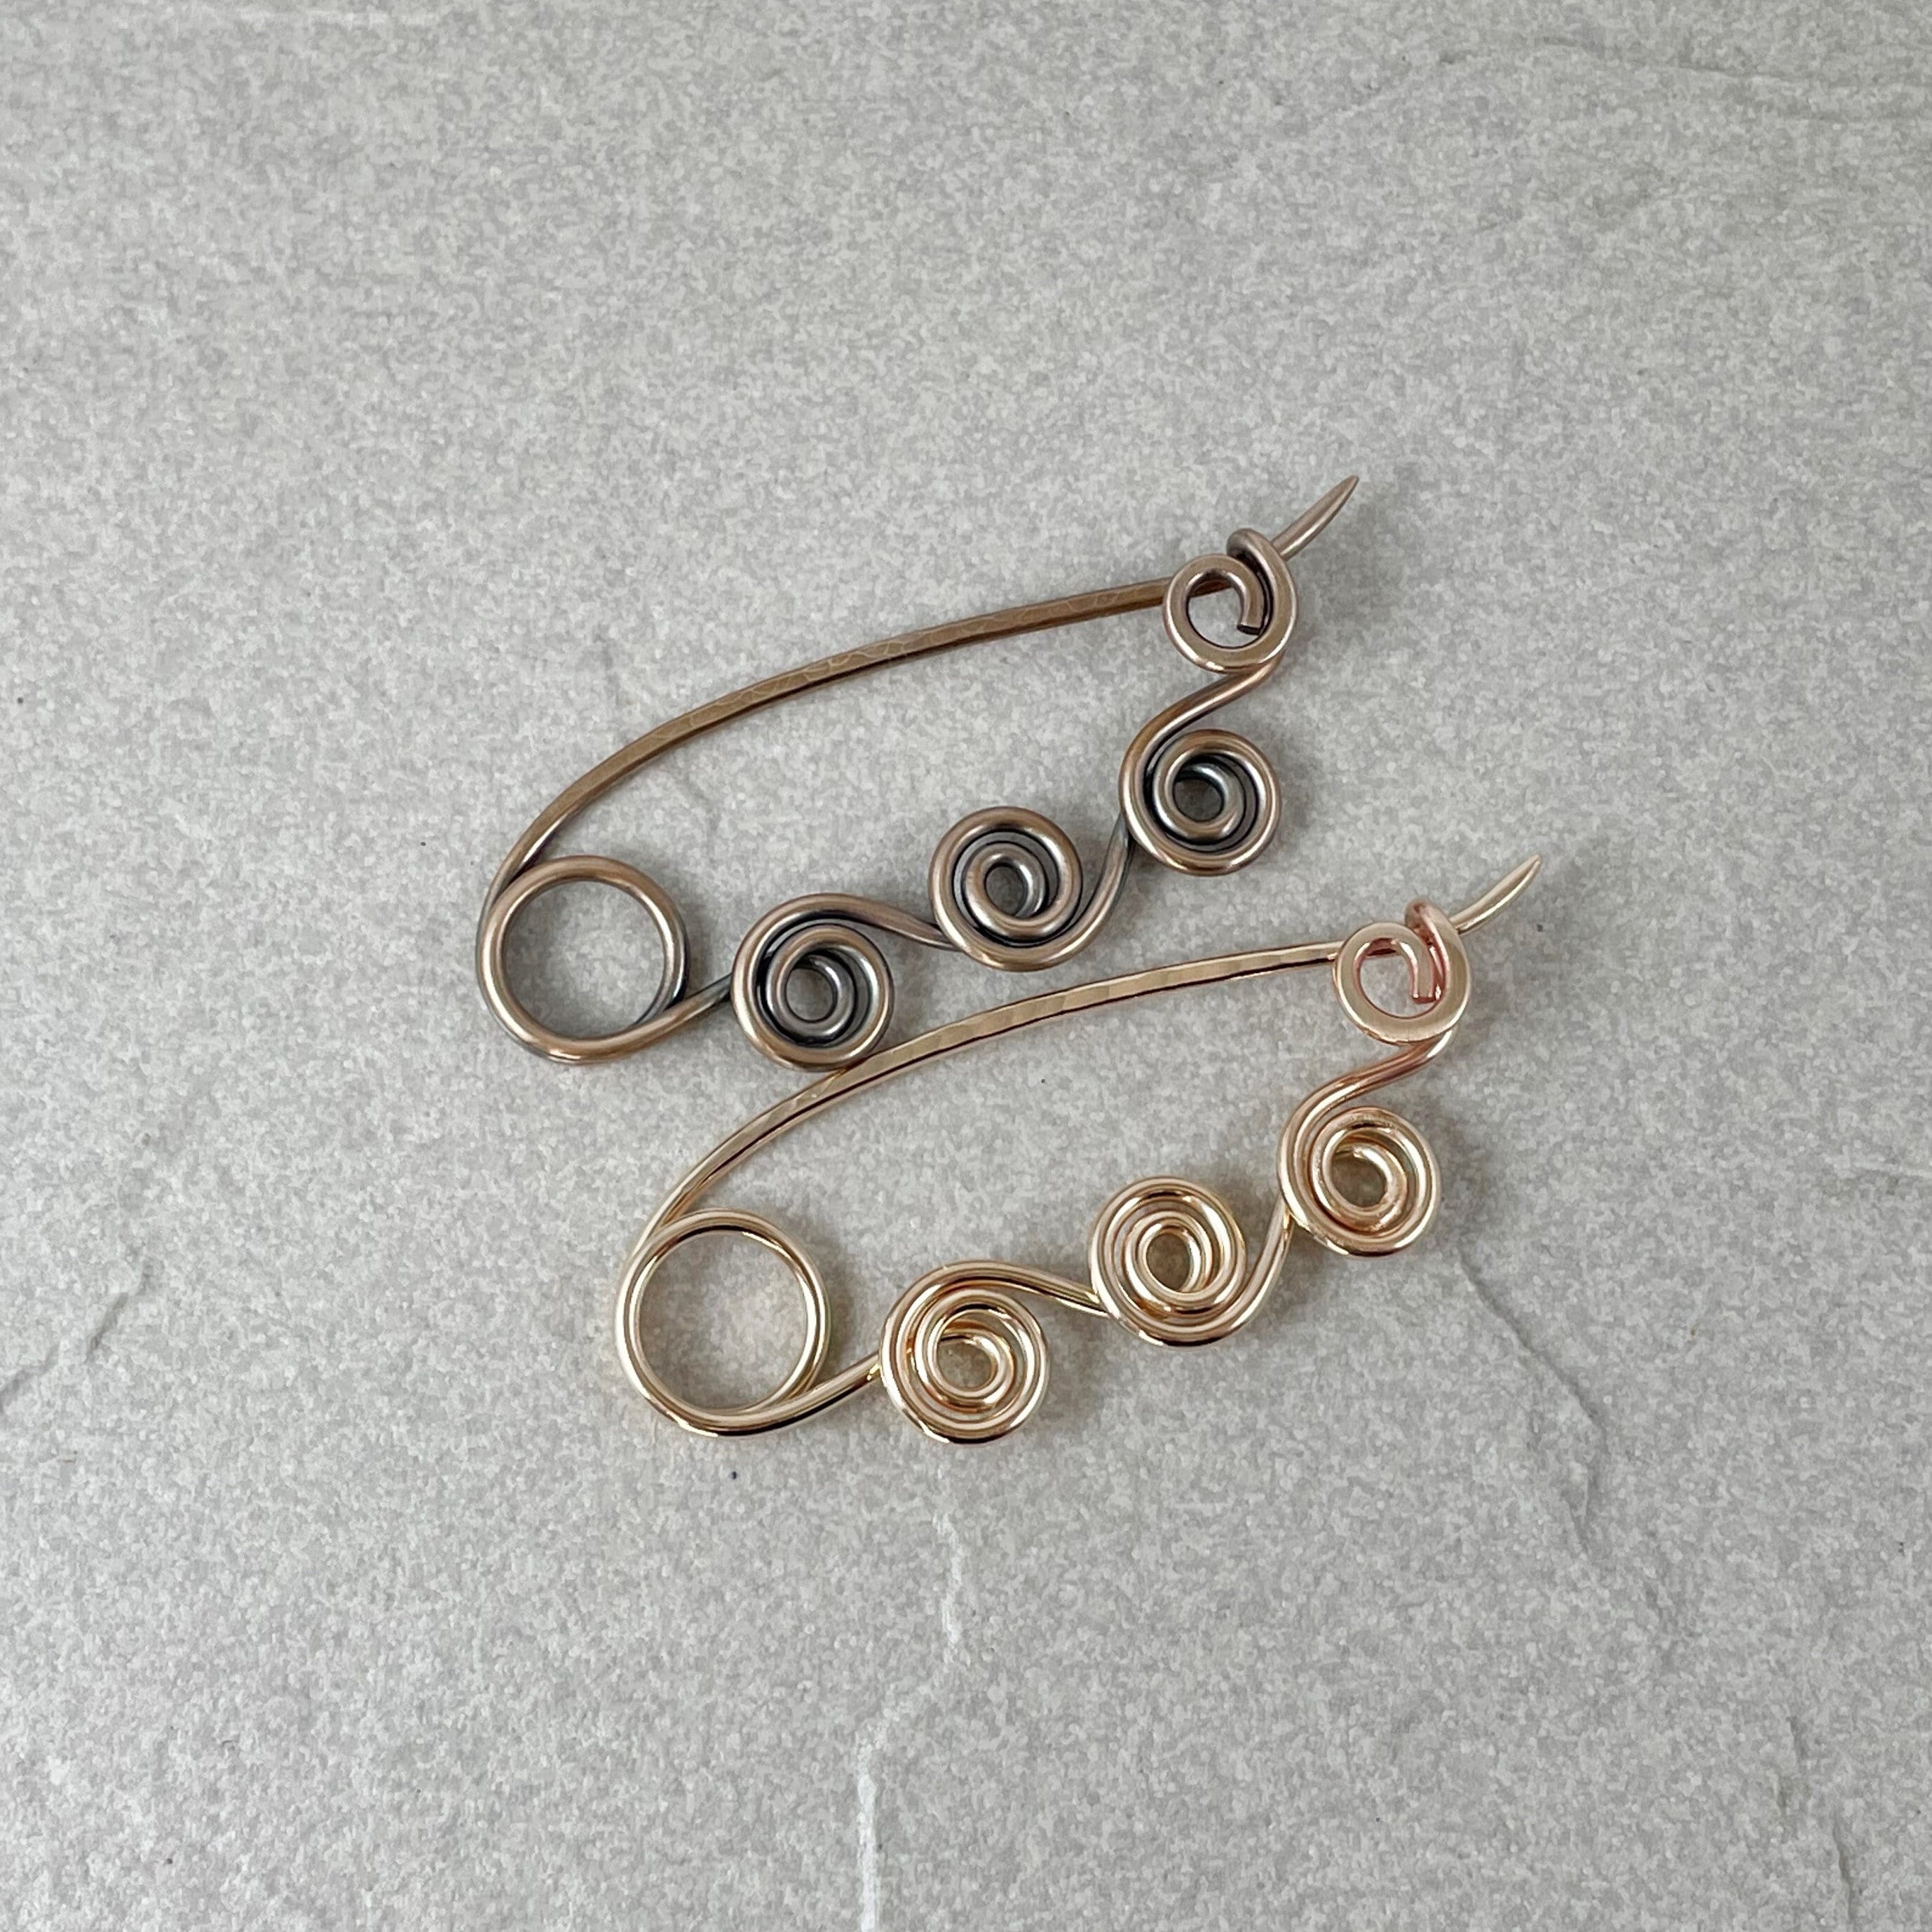 Oxidized Brass Wire - Hand Finished - You Pick Gauge 12, 14, 16